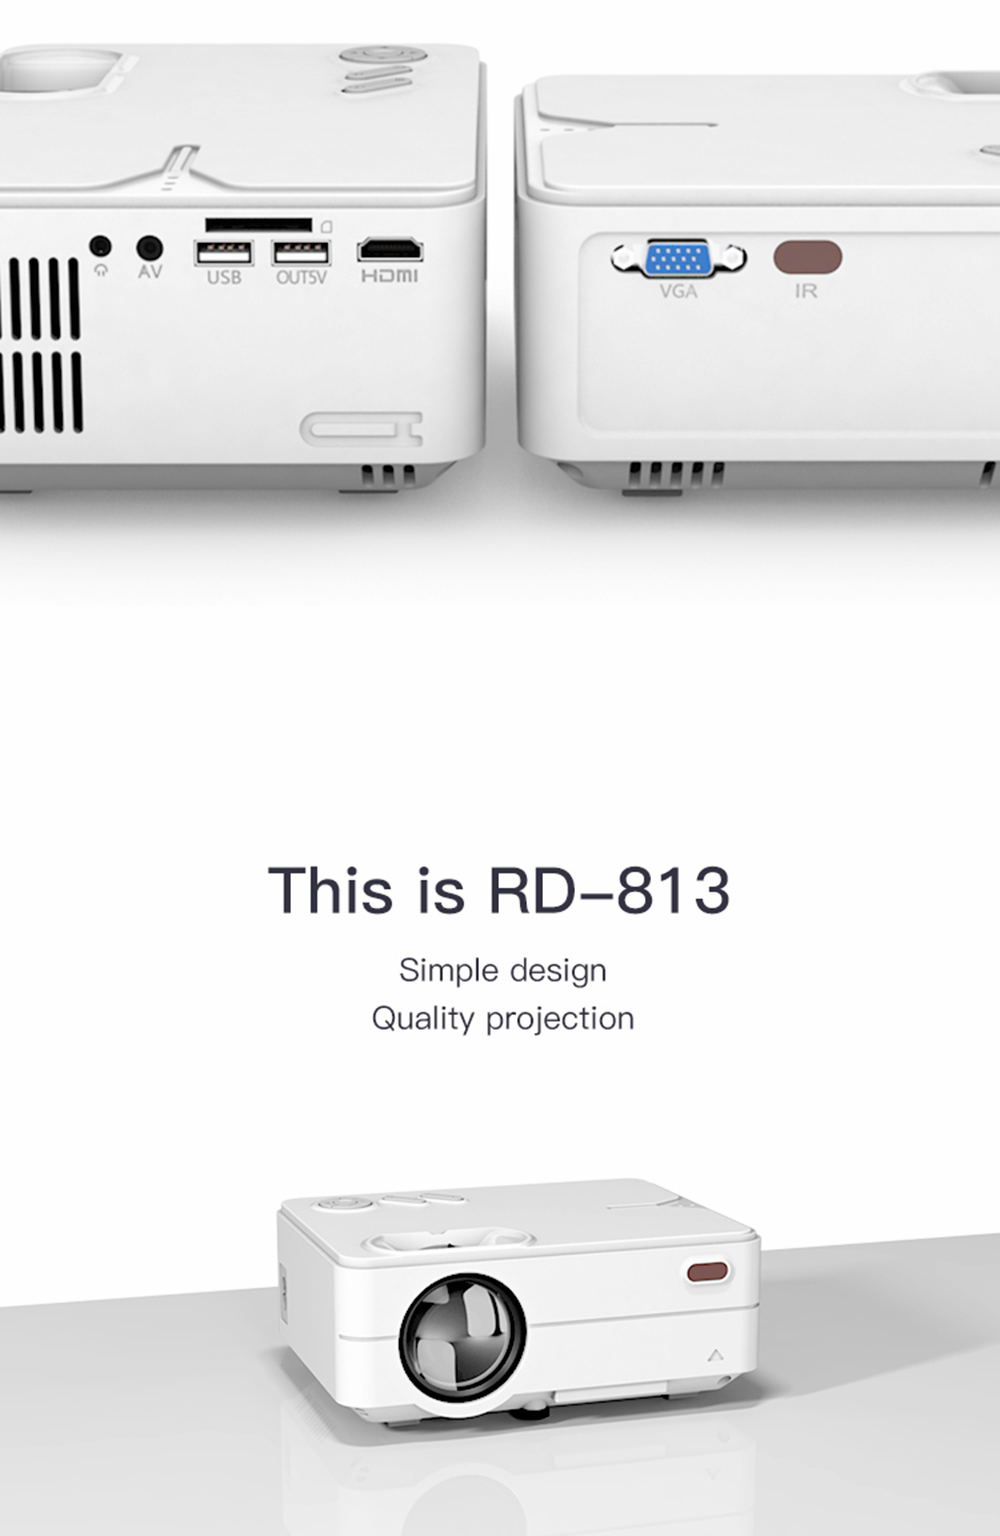 rigal rd-813 1080p projector for sale